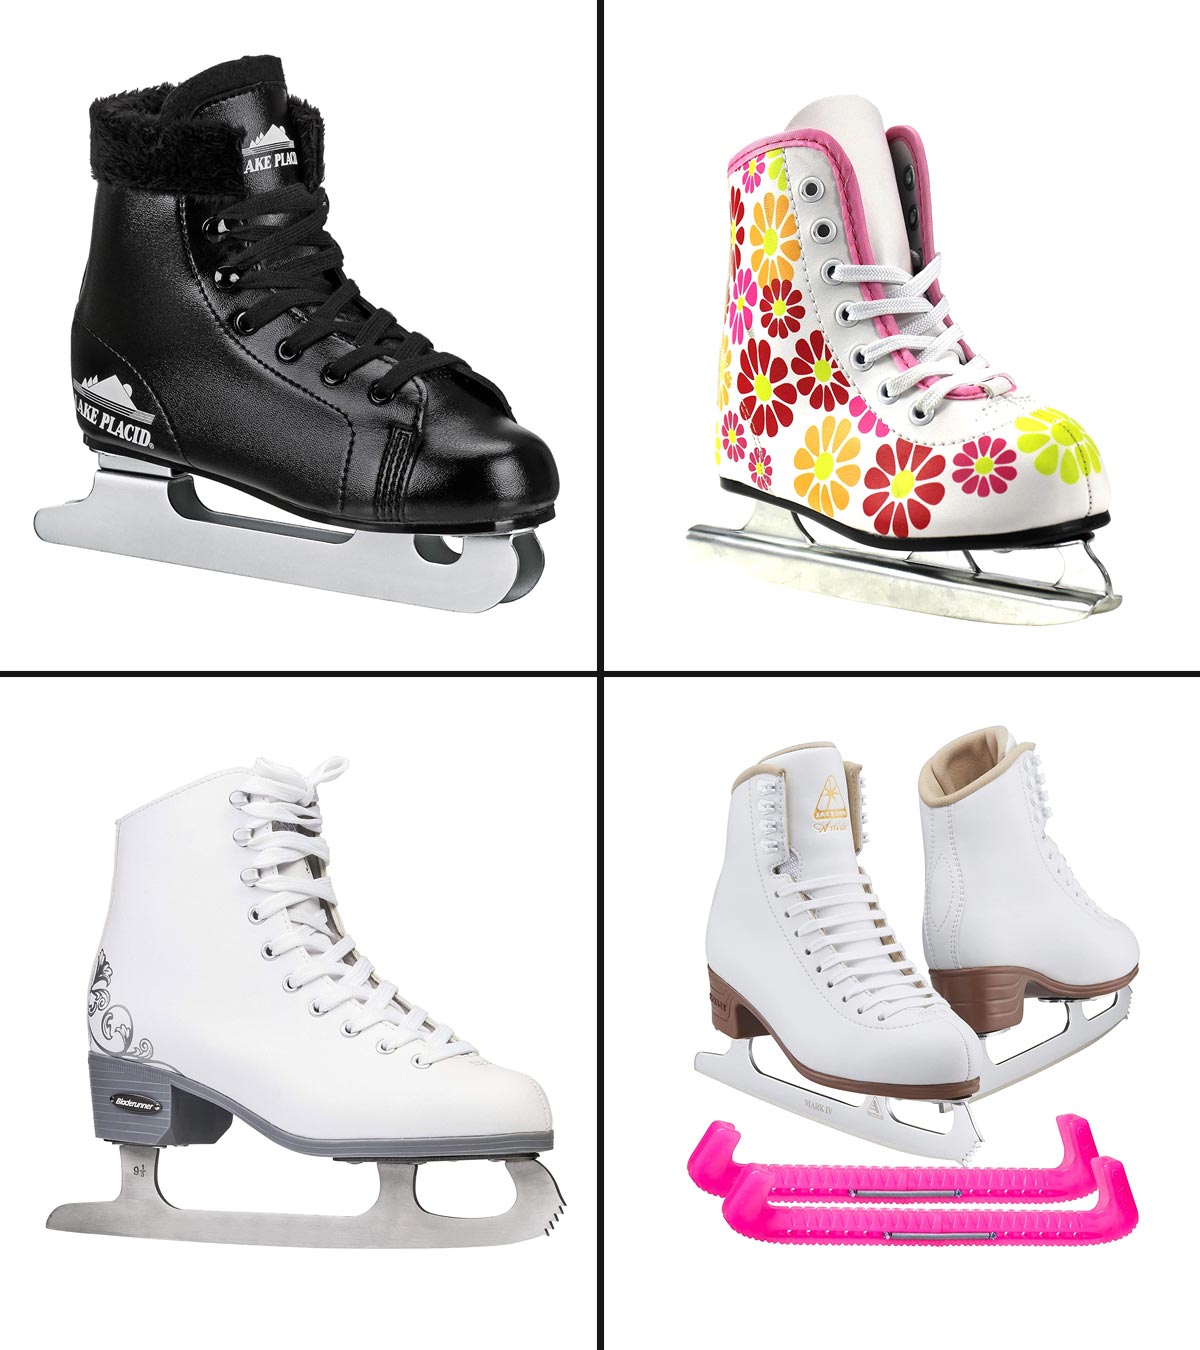 ice skating shoes shop near me